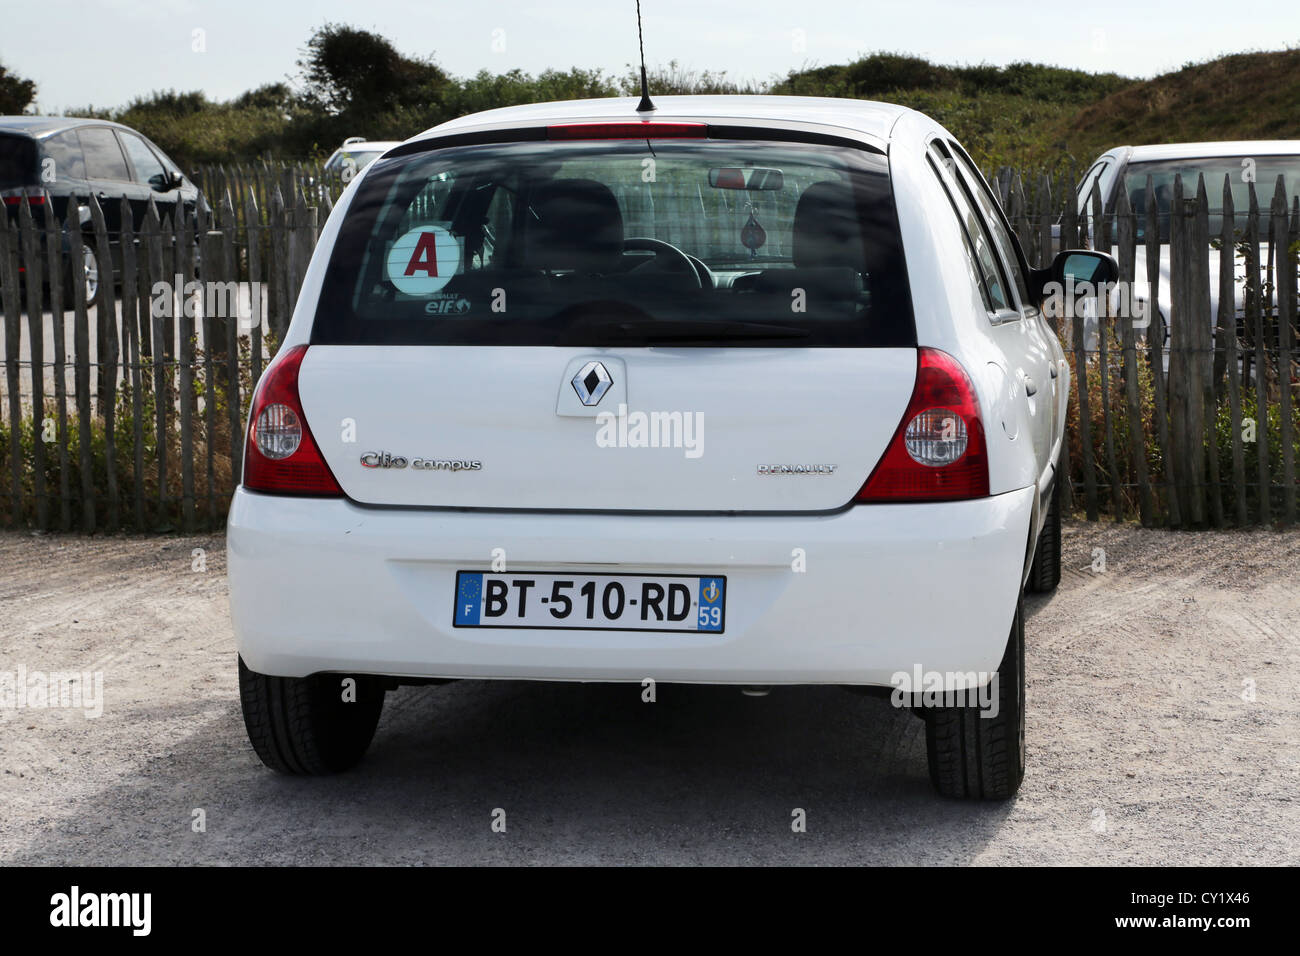 Renault Clio High Resolution Stock Photography and Images - Alamy